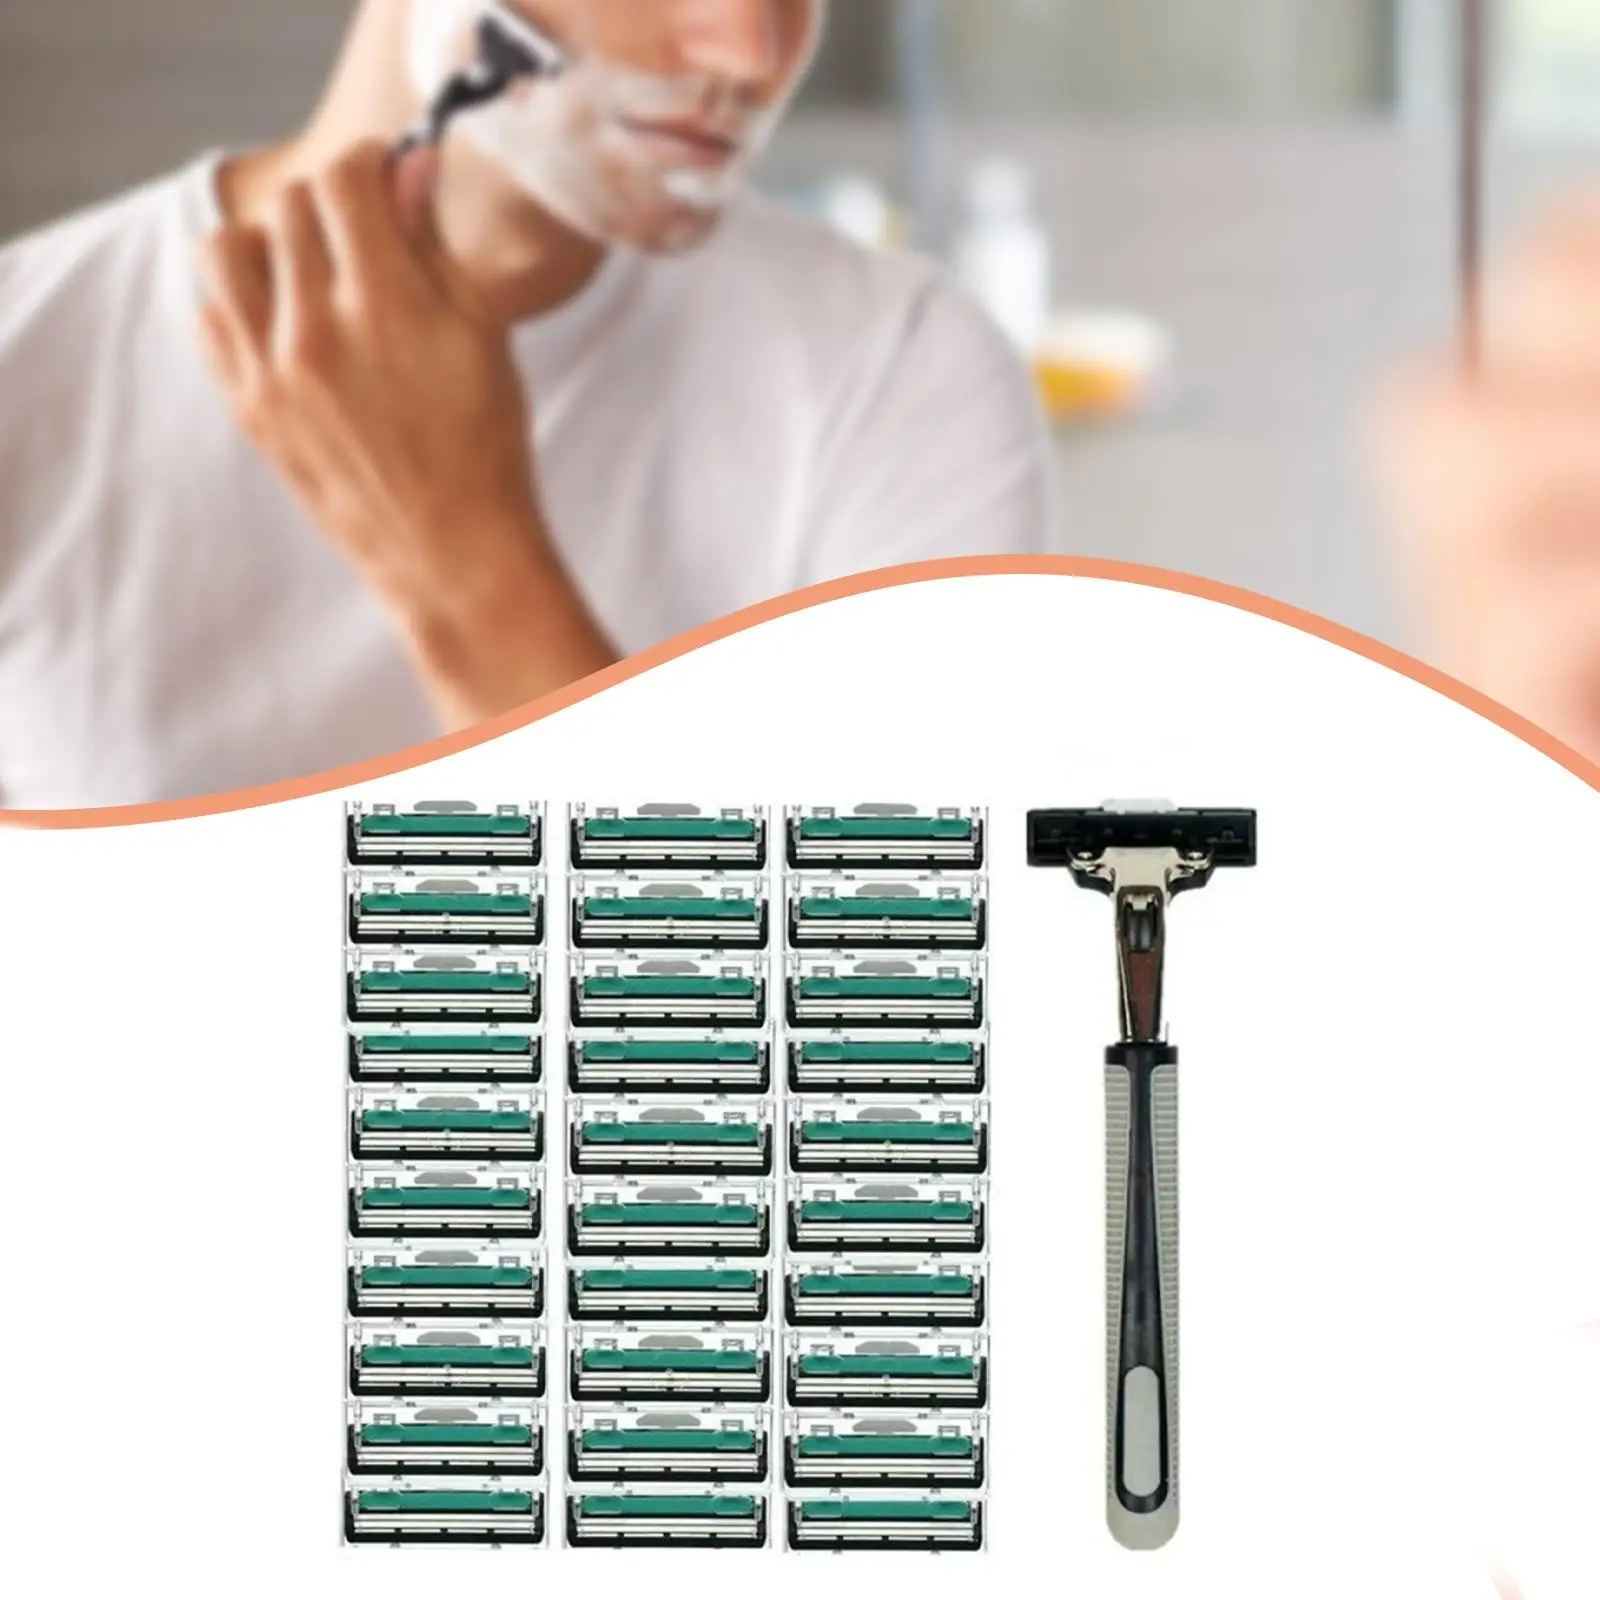 Manual Double Edge Shaver Grooming Portable Reusable Rustproof Hair Remover Heavy Duty Face Shaving Trimmer for Salon Home